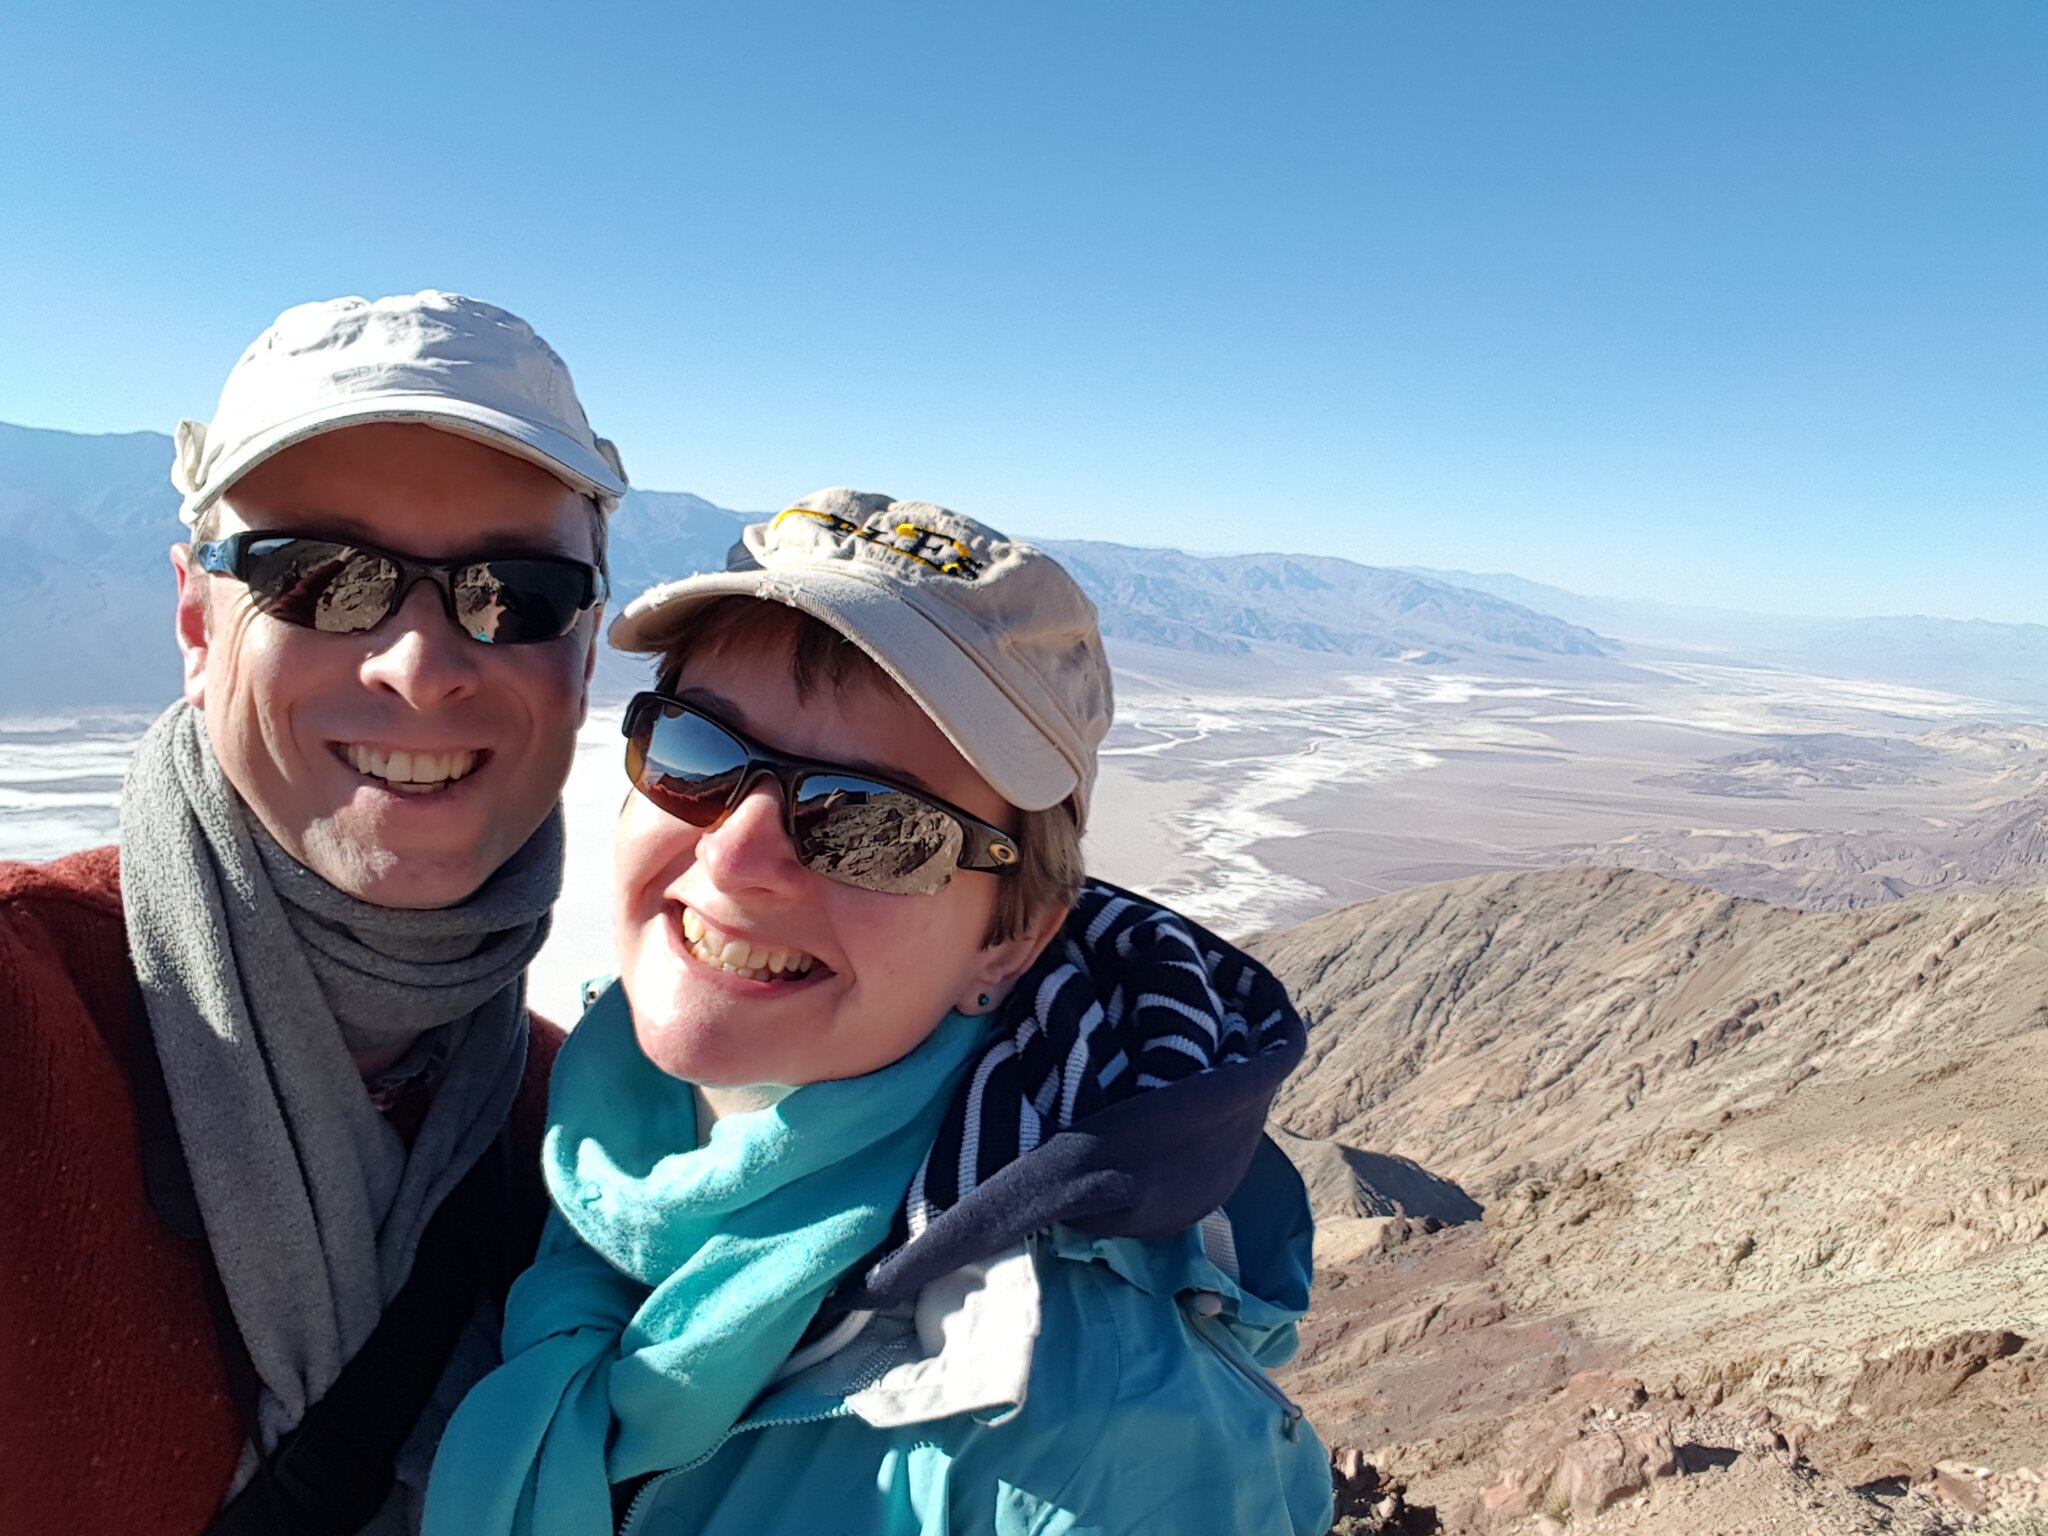 At Dante's View in Death Valley